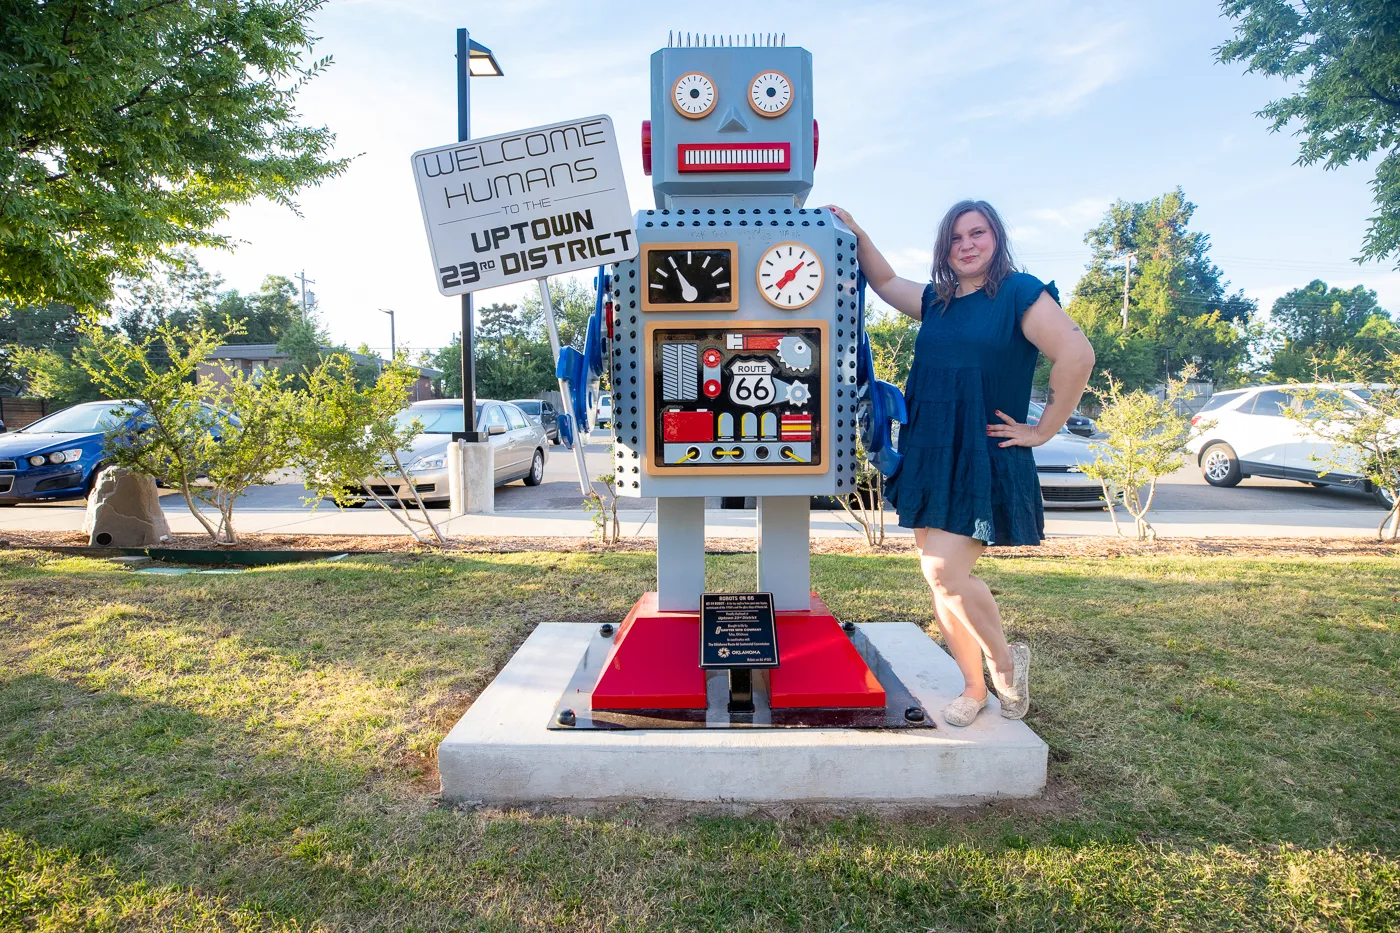 Robots on 66 in Oklahoma City - Route 66 roadside attraction